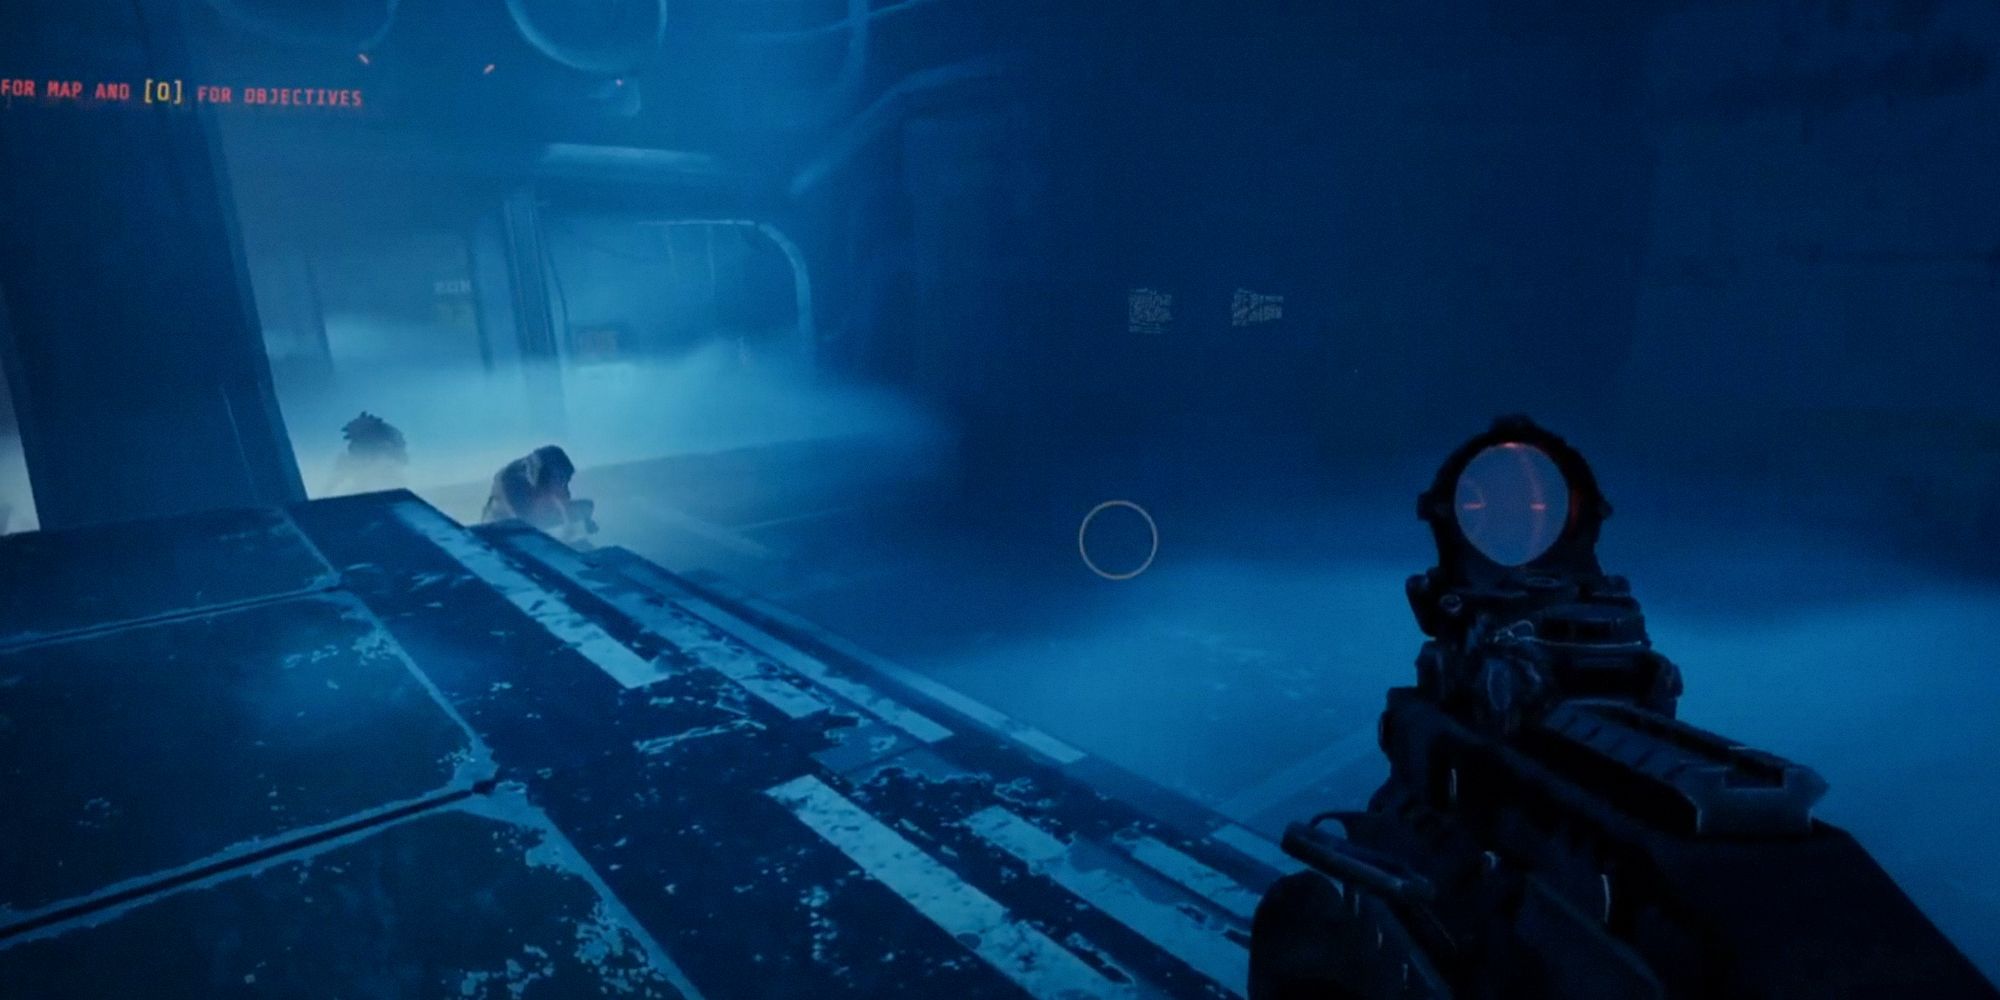 rifle on the right of the screenshot. enemies ahead to the left. blue misty air.